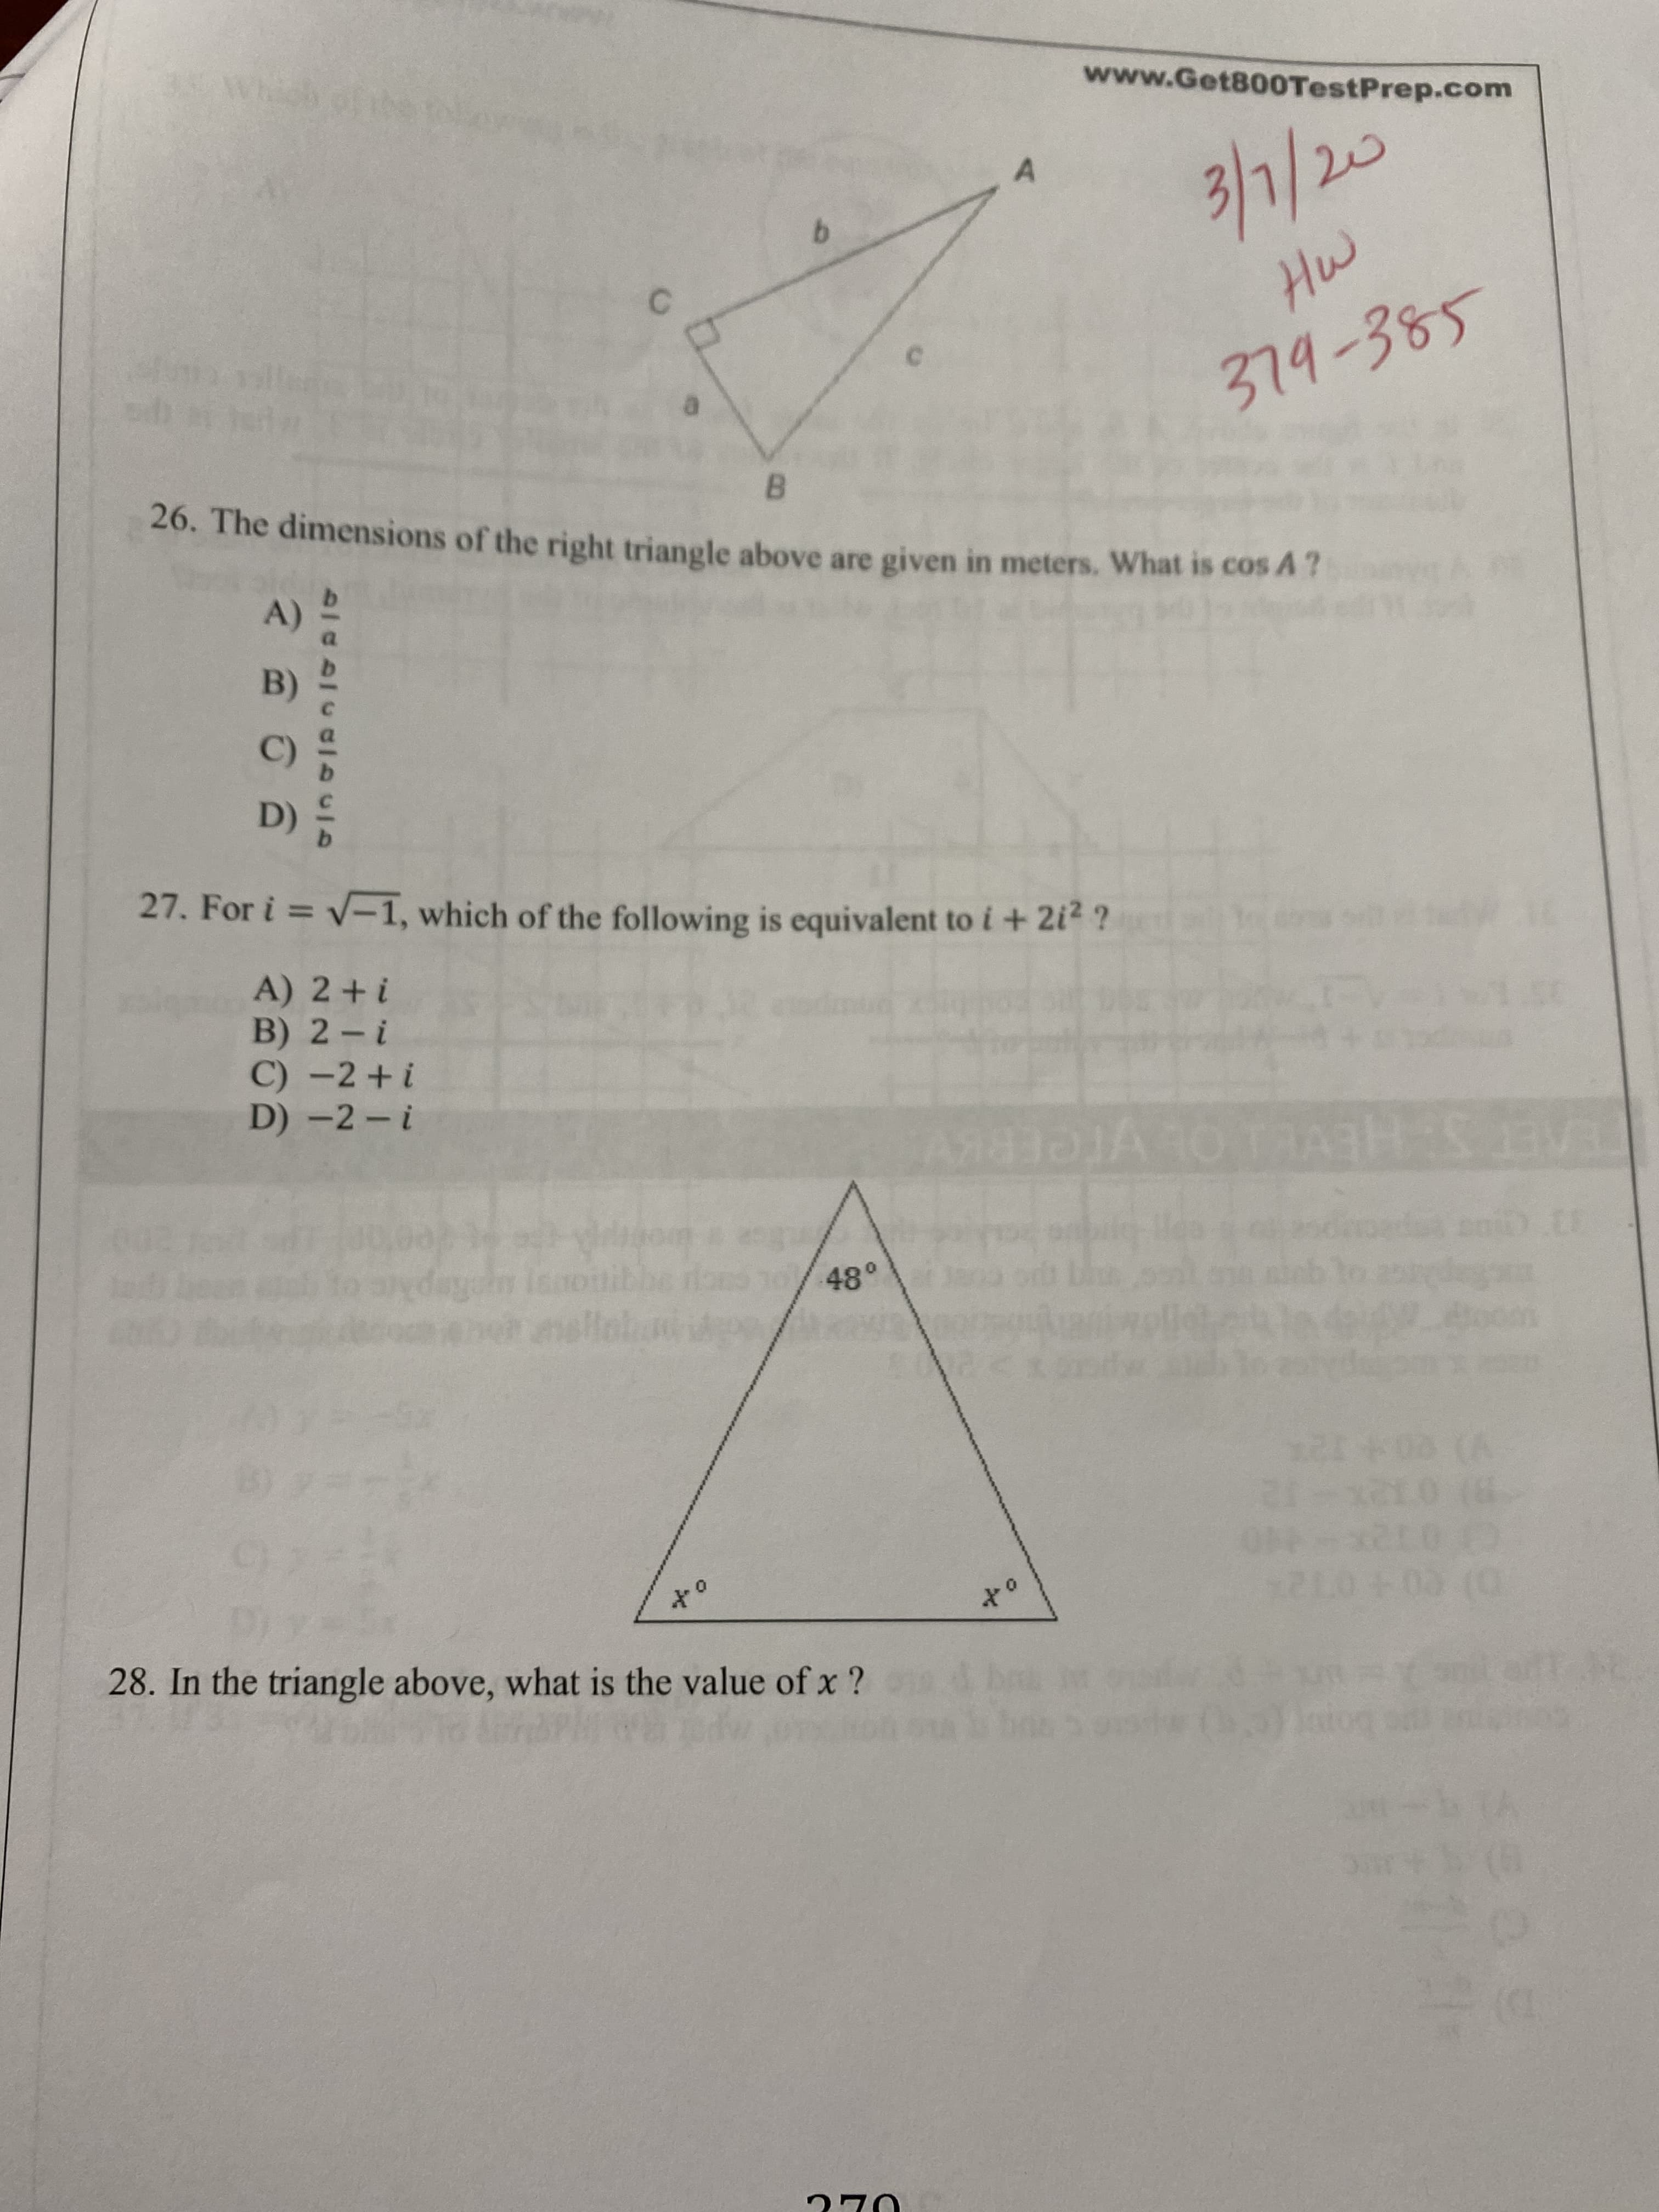 www.Get800TestPrep.com
3/1/20
Hw
379-385
B.
26. The dimensions of the right triangle above are given in meters. What is cos A?
A)
B)
C)
D)
27. For i = V-1, which of the following is equivalent to i + 2i2 ?
A) 2+ i
B) 2- i
C) -2+i
D) -2- i
VreERKV
48°
10 (6
28. In the triangle above, what is the value of x ?
